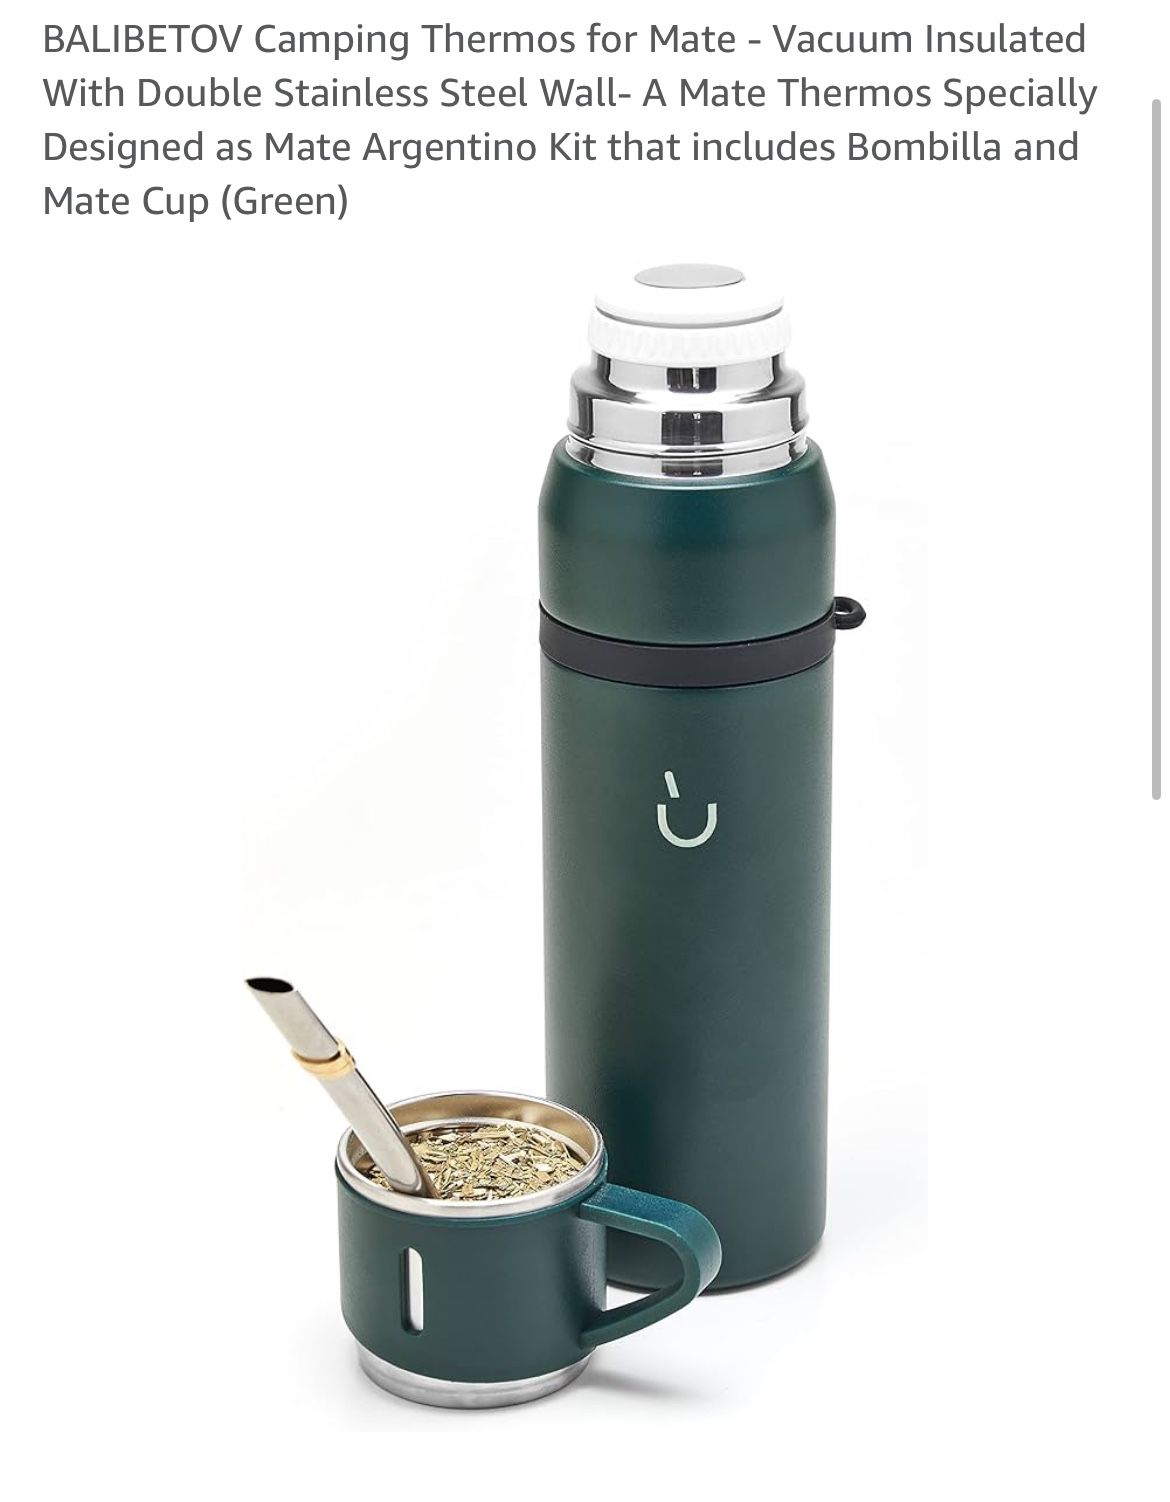 BALIBETOV Camping Thermos for Mate - Vacuum Insulated With Double Stainless Steel Wall- A Mate Thermos Specially Designed as Mate Argentino Kit that i